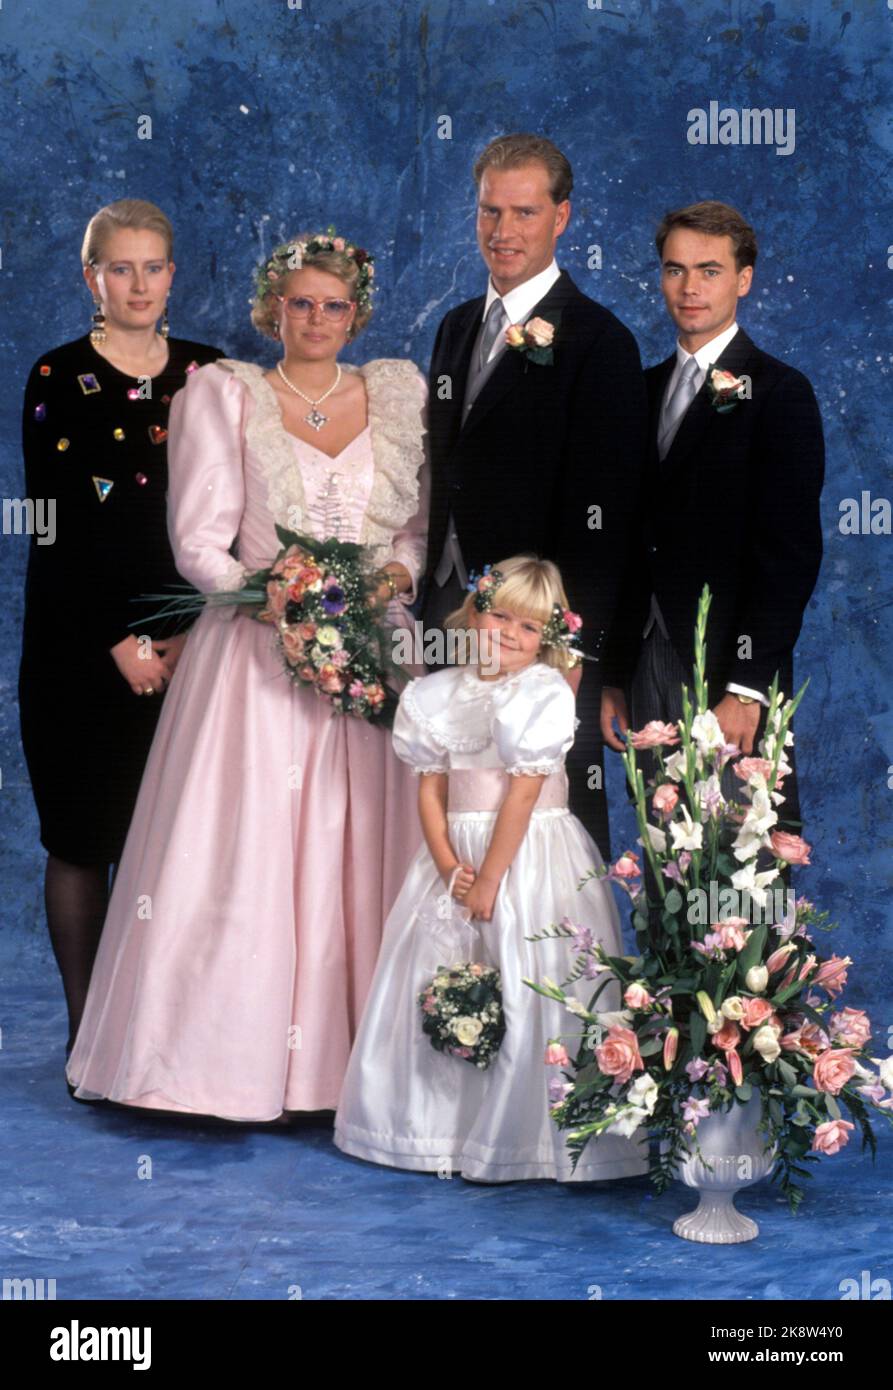 Oslo 19891209: Cathrine Ferner, grandson of King Olav, marries Arild Johansen in Ris church in Oslo. The bride in pink dress with sequins, lace and flower wreath in the hair. Here the bridal couple photographed with the grooms, Benedikte Ferner and Petter Elind. In the picture also the bridal girl, Laila Maria, the groom's 5 And half a year old niece. Photo: Knut Falch Stock Photo